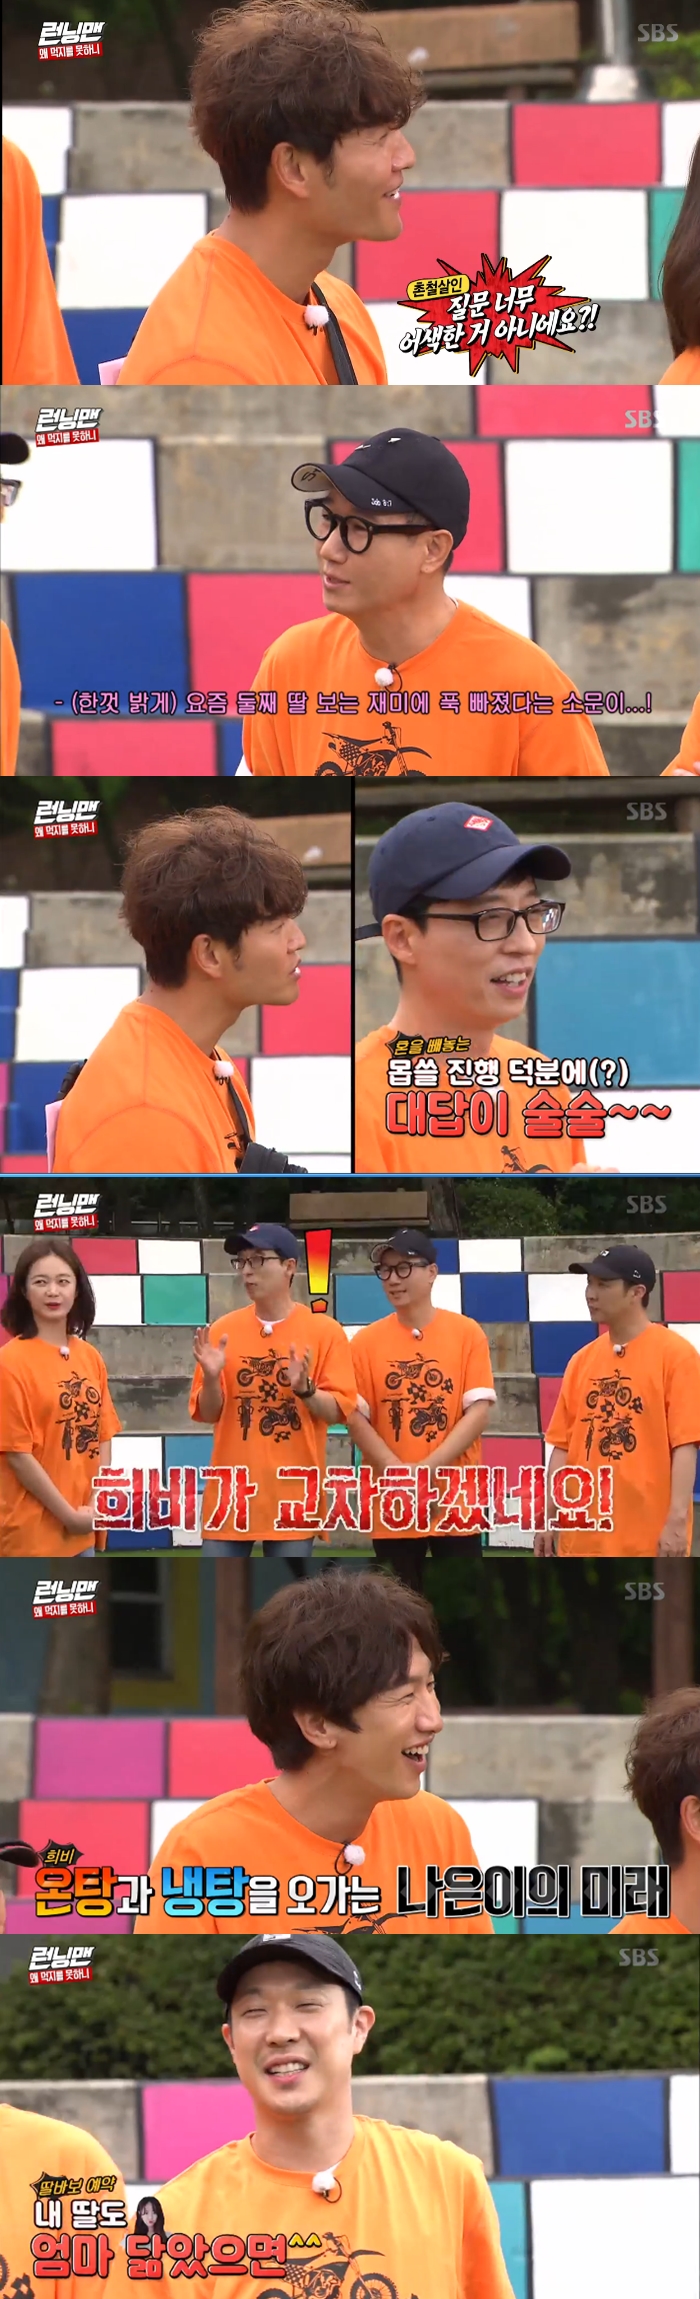 Kim Jong-kook worried about Yoo Jae-Suks daughterIn the SBS entertainment program Running Man broadcasted on the afternoon of the 4th, Yoo Jae-Suk, who sends Haru Haru thinking about her daughter who has just been stoned, certified her daughter as a fool.Ji Seok-jin, as a radio host, opened the opening with Yoo Jae-Suk asking questions about his daughter.Yoo Jae-Suk said she could not hide her smile when her daughters story came out and said, Its just after the stones and its so beautiful.In the news that Yoo Jae-Suks daughter has already passed the stone, Jeon So-min asked, After the stone, I now know who my mother and father resemble.Yoo Jae-Suk said, I have been back and forth so far. My daughters face has not yet been fully formed.Kim Jong-kook, who listened to Yoo Jae-Suk, laughed at the direct hit saying, Every day, I will cross.In the vitriol of Kim Jong-kook, Yoo Jae-Suk did not hide his embarrassment, saying, What if you resemble me?